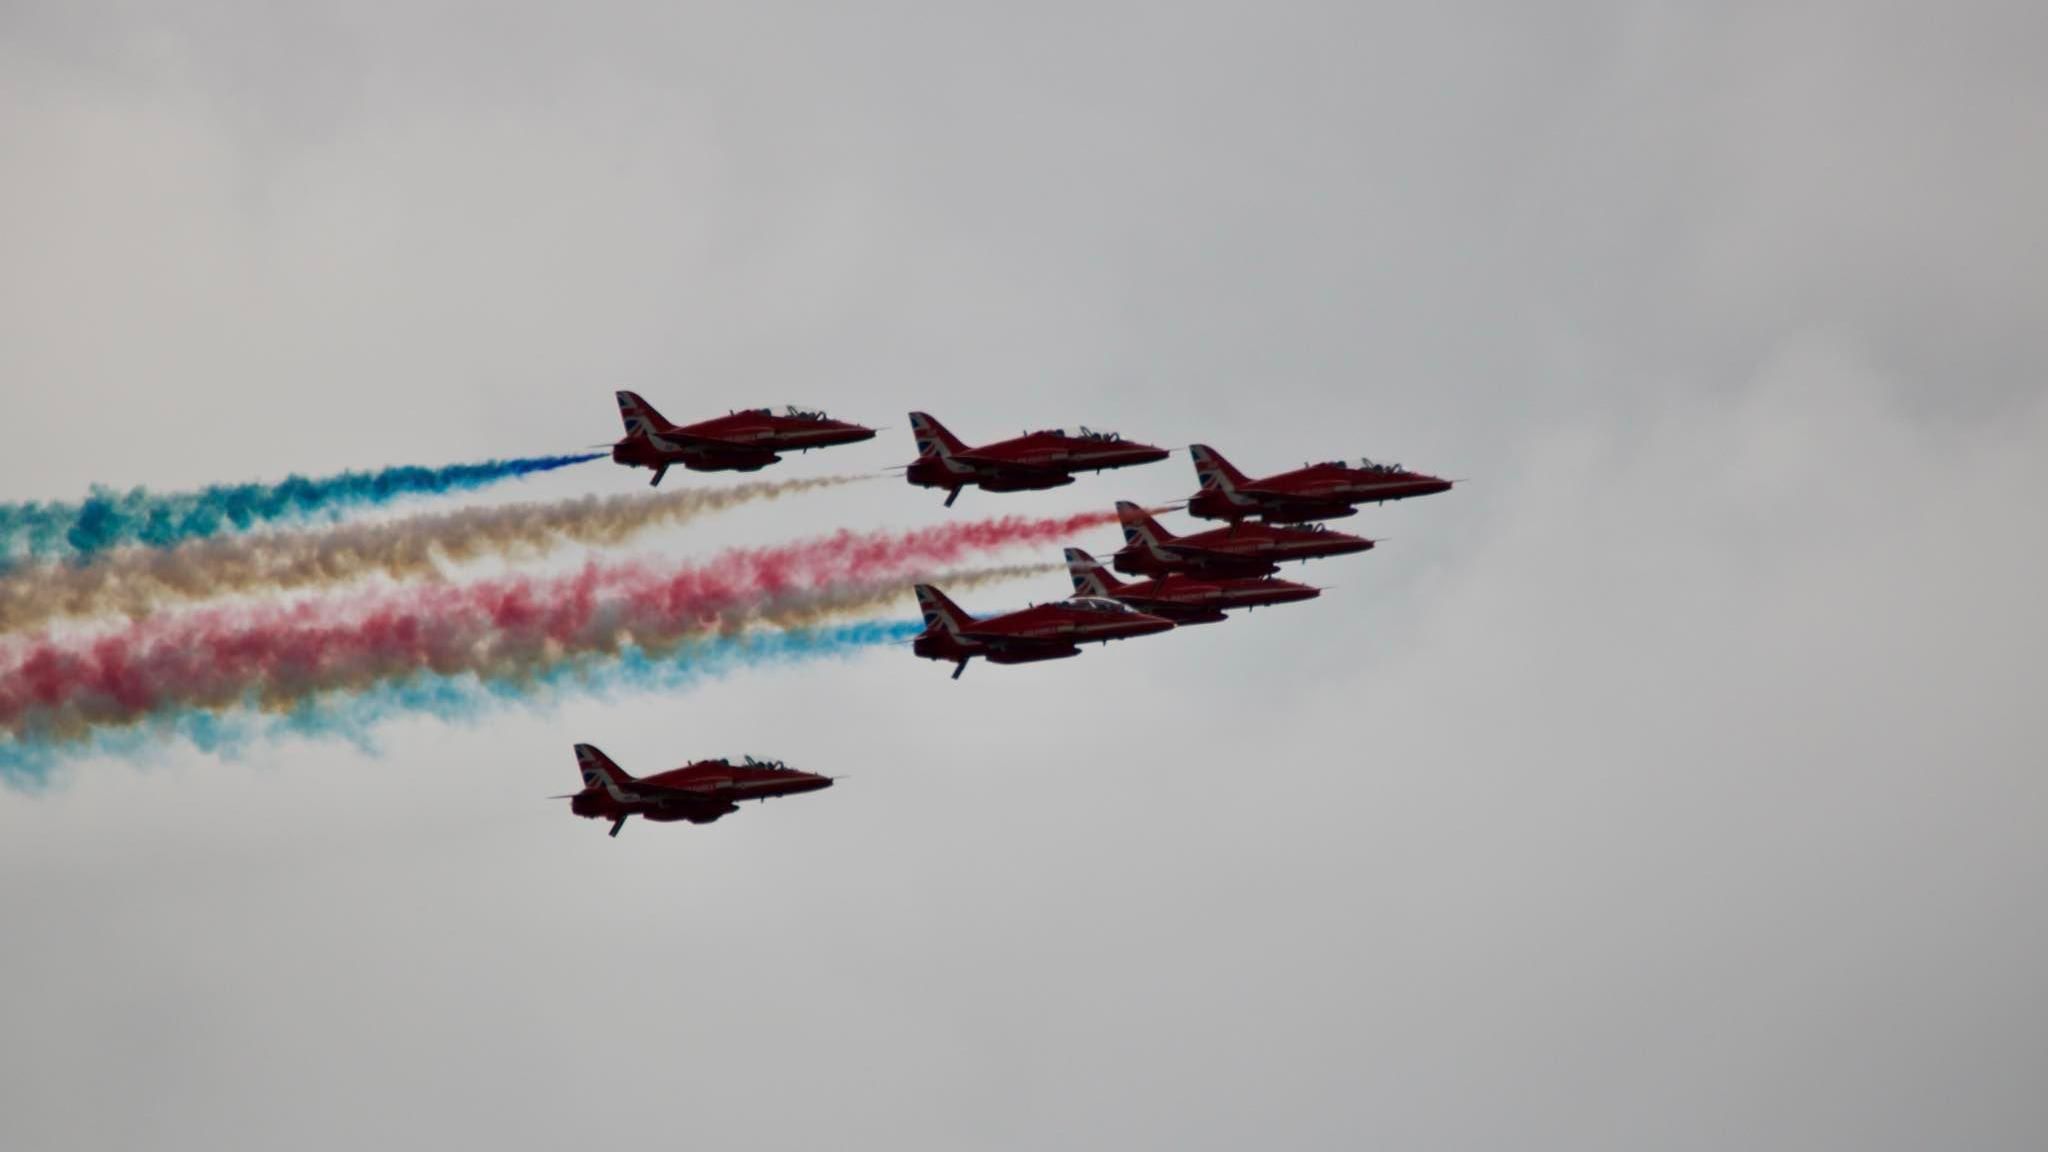 Seven red arrows flying in formation, spouting red, blue and white smoke